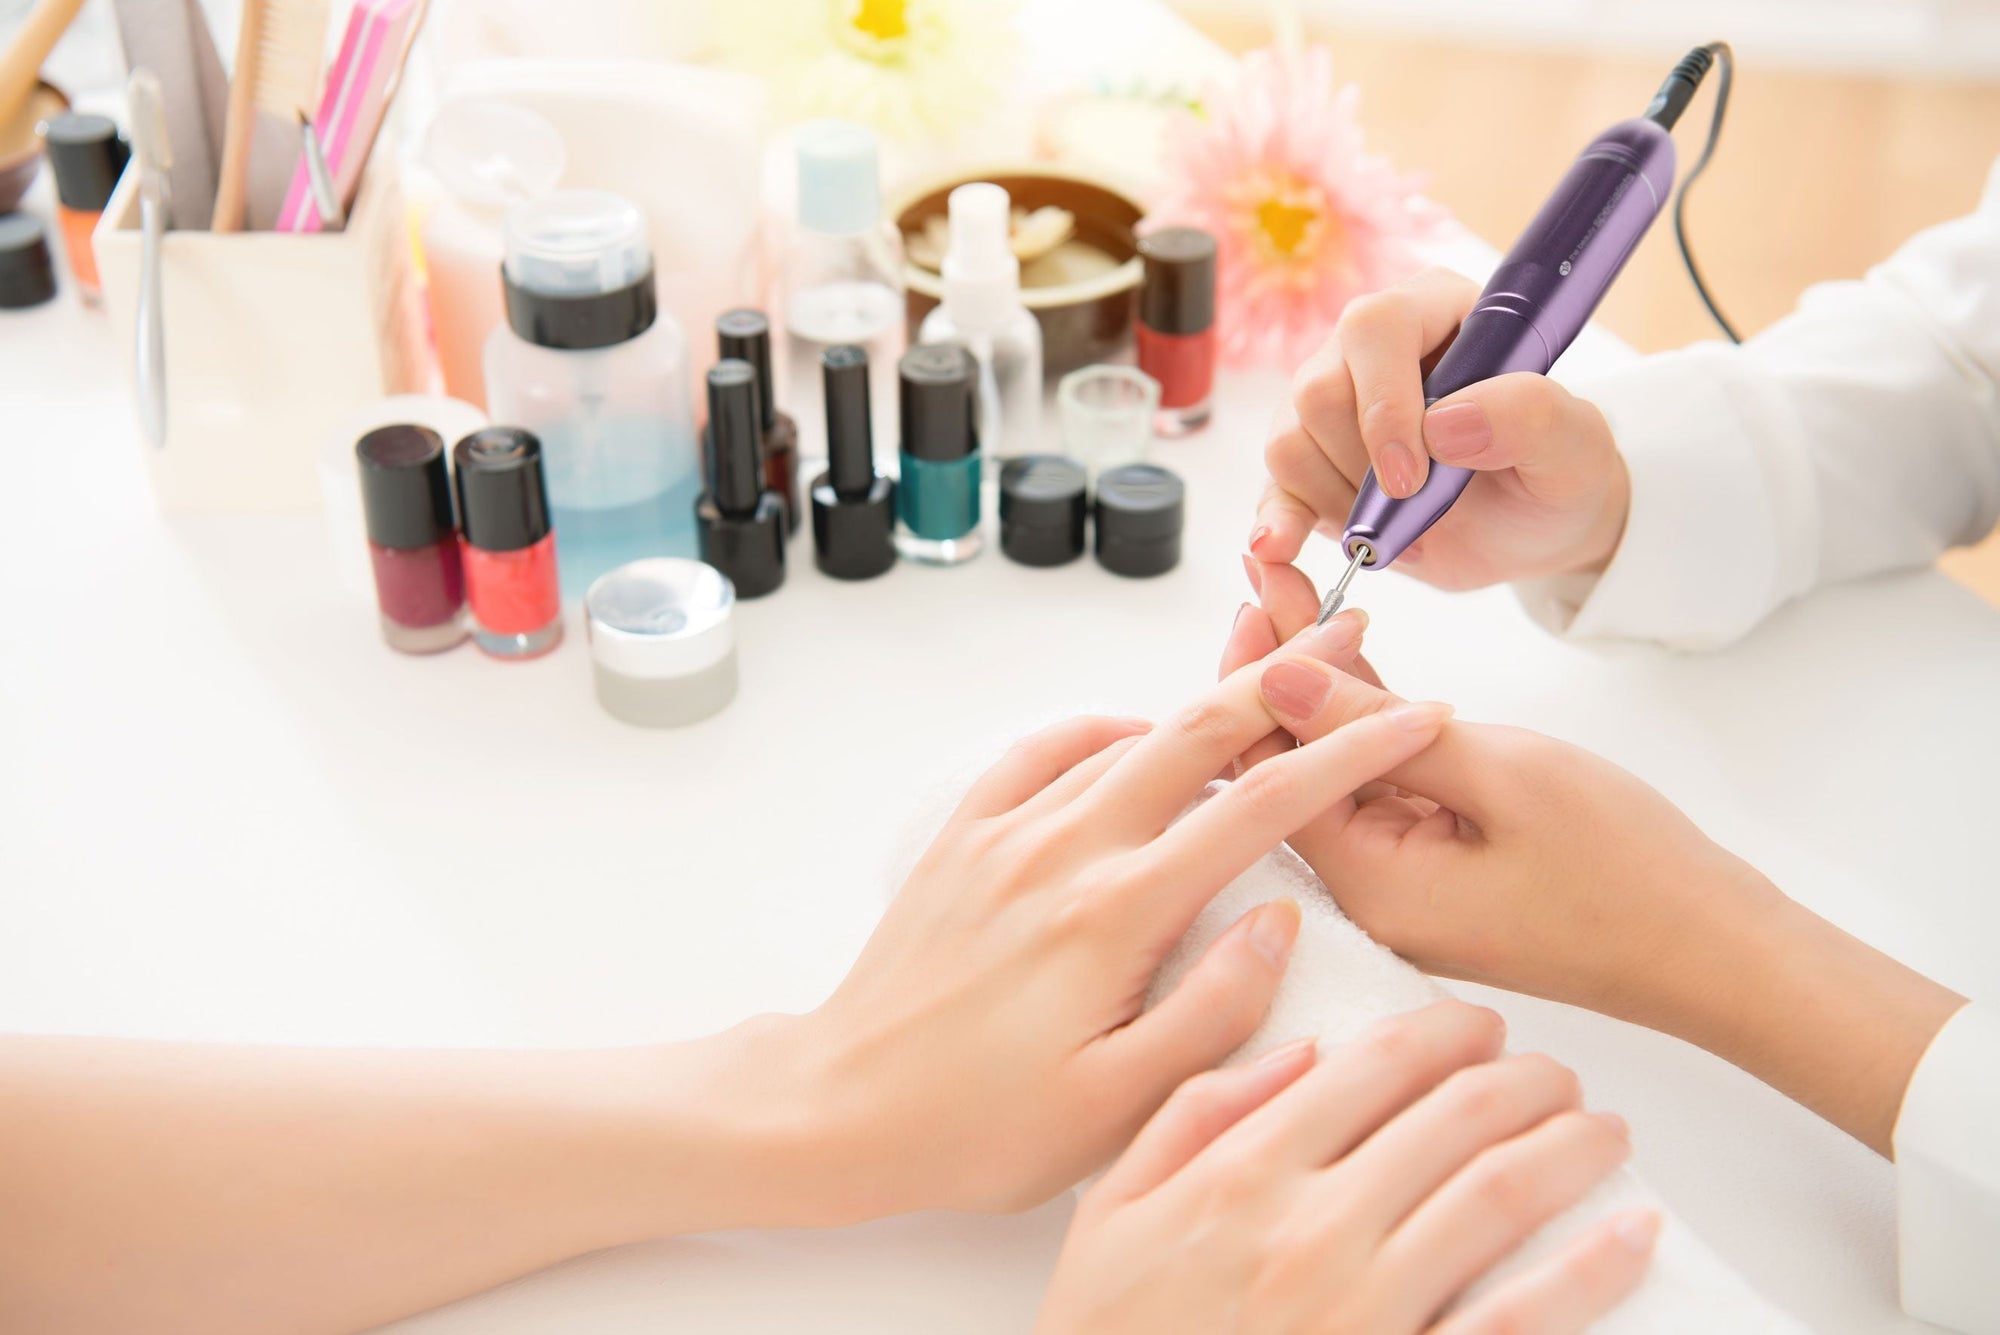 professional nail file being used in nail salon by nail technician to file ladies nails 